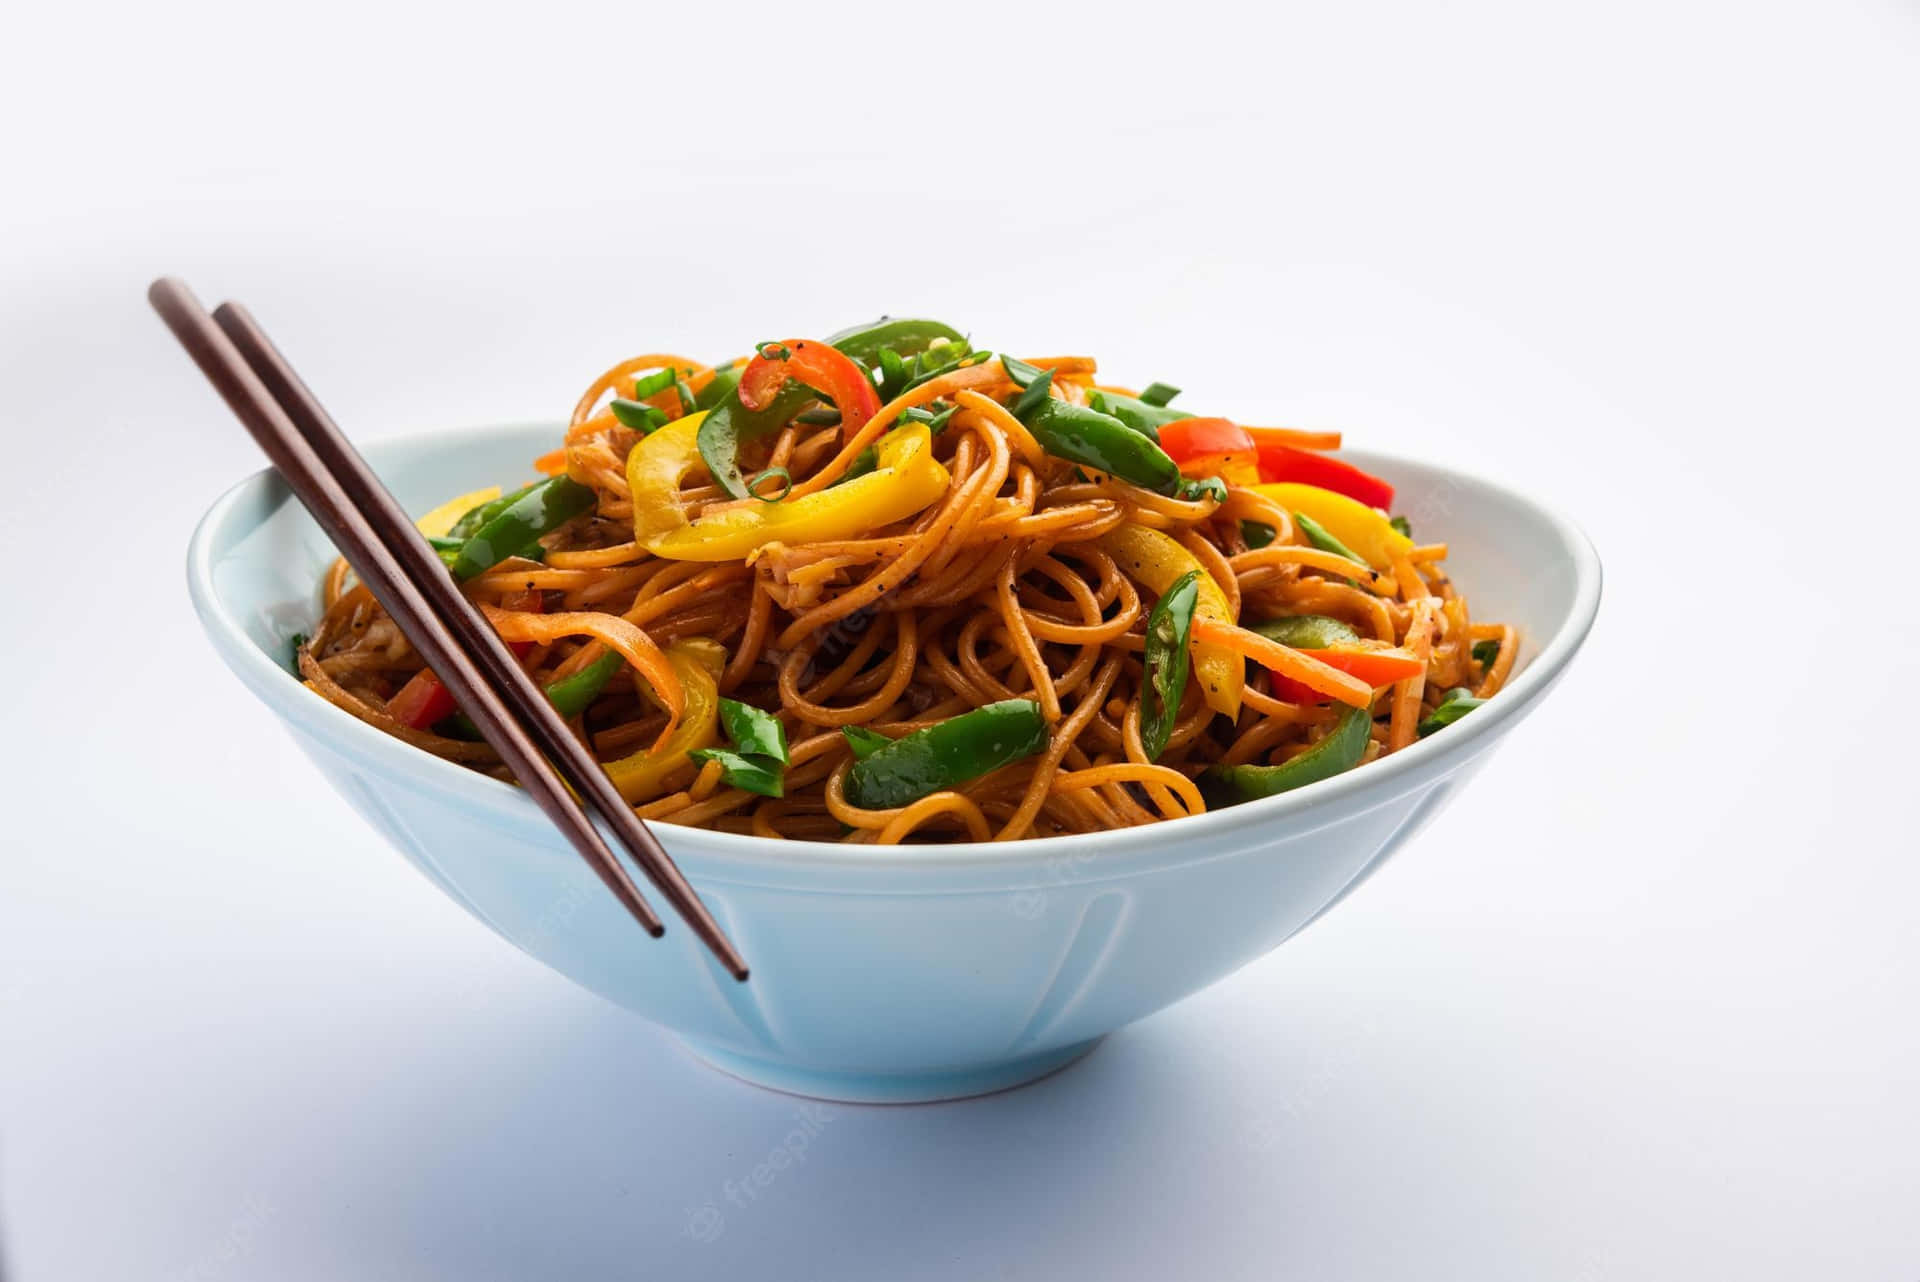 Delicious Chinese Stir-Fried Noodles with Chili Wallpaper